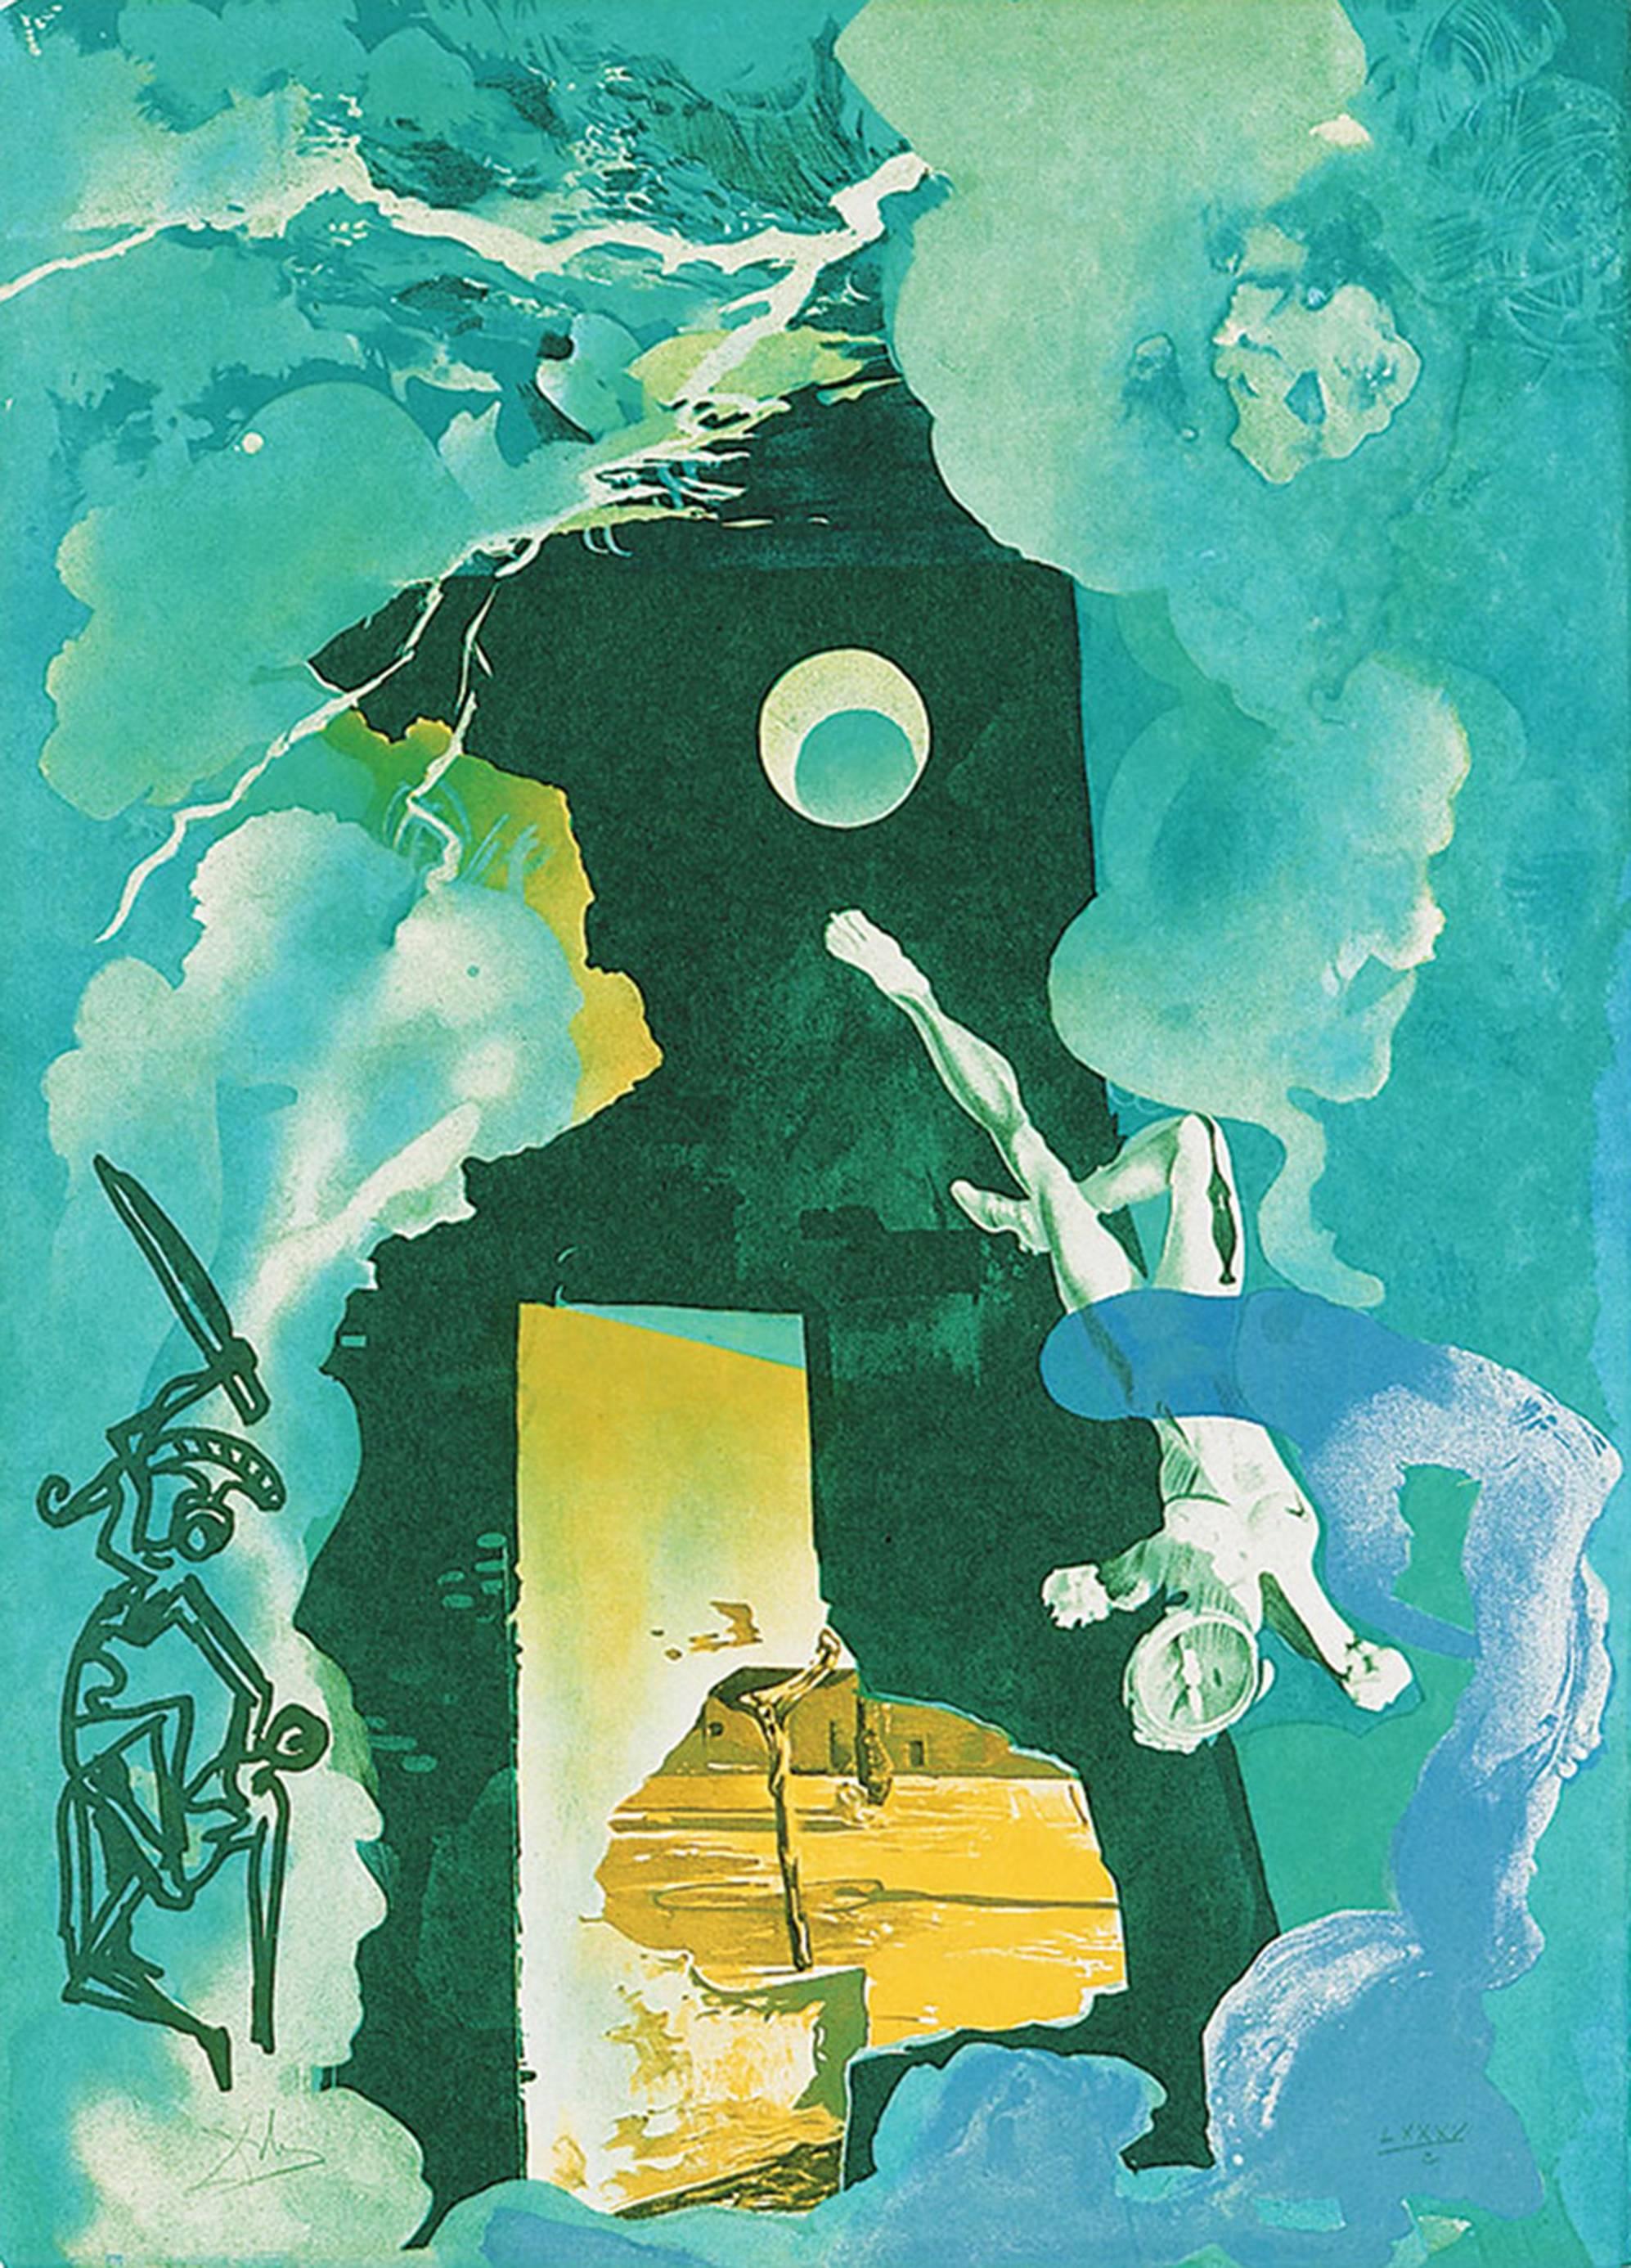 Salvador Dalí Print - The Eternity of Love from the Trilogy of Love Portfolio